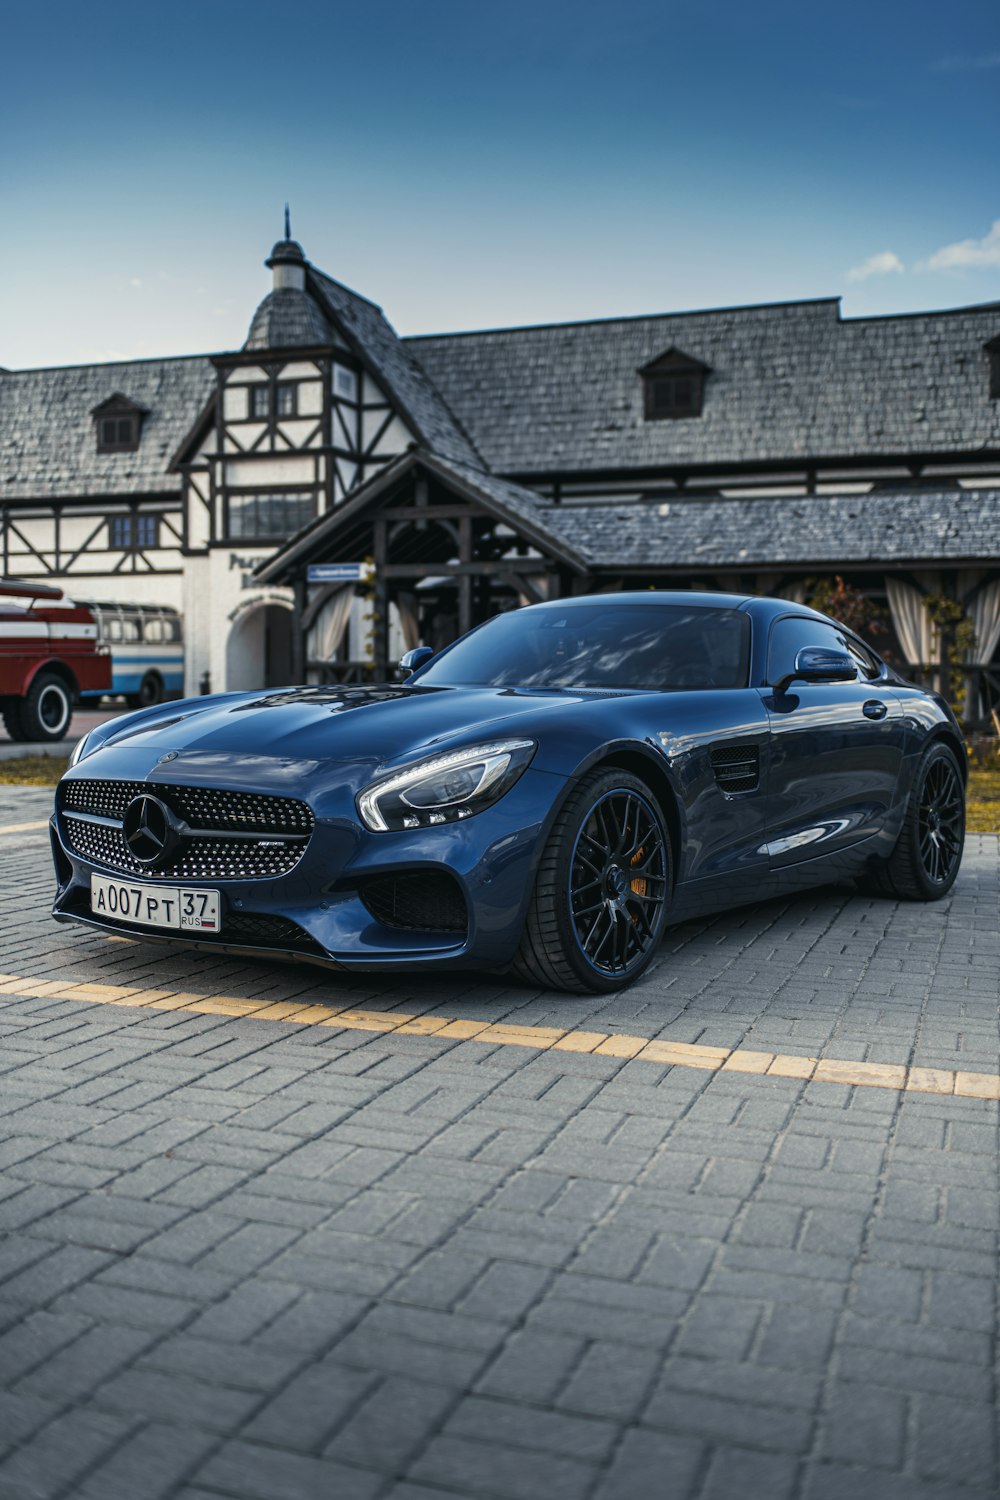 Amg Gt Pictures Hd Download Free Images On Unsplash